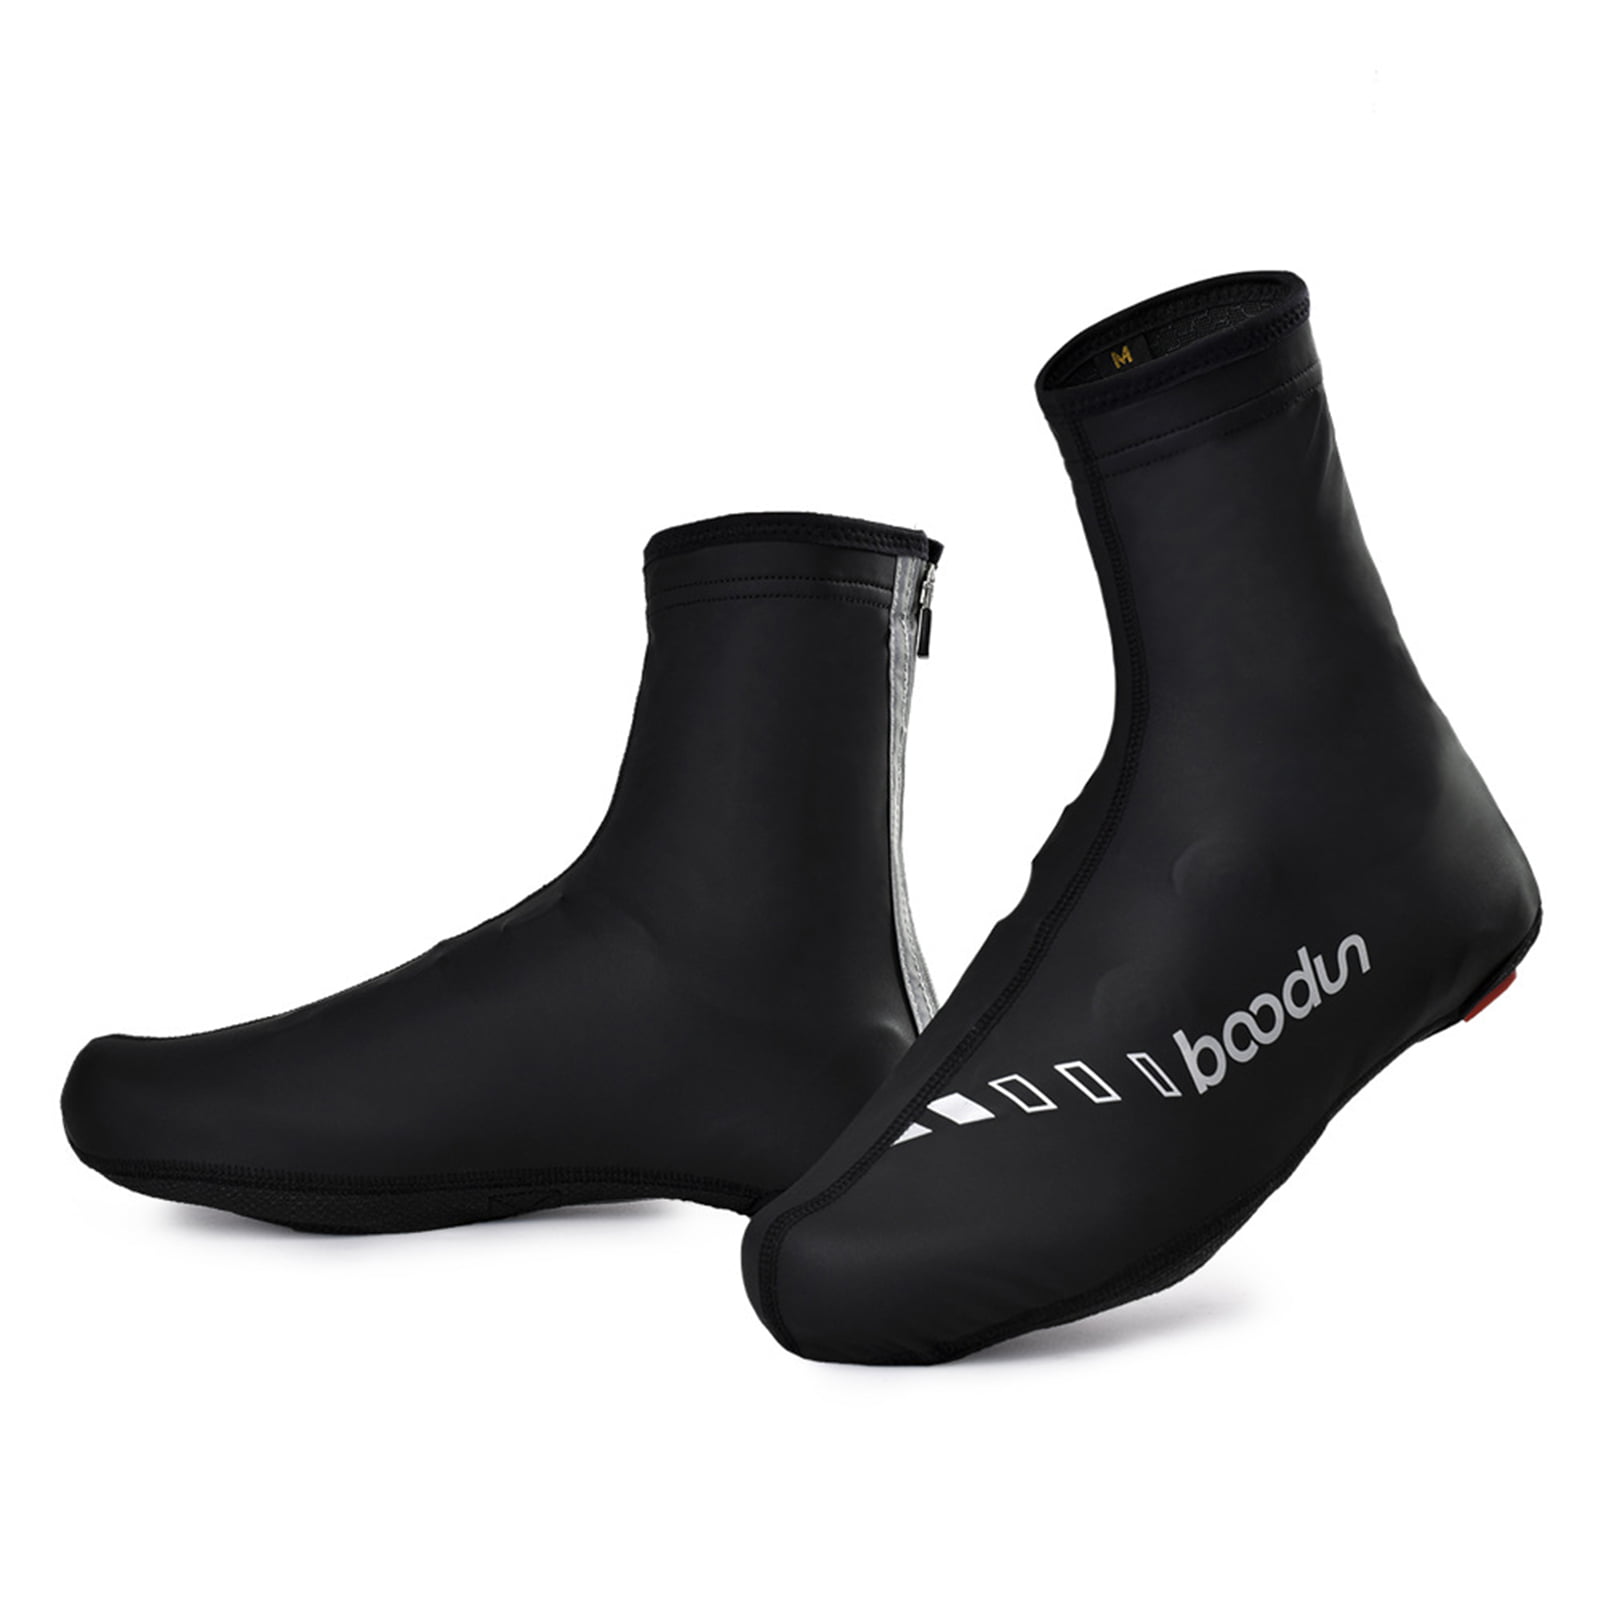 Bike Bicycle Shoe Covers Cycling Overshoes Zippered Winter Cycling Booties 